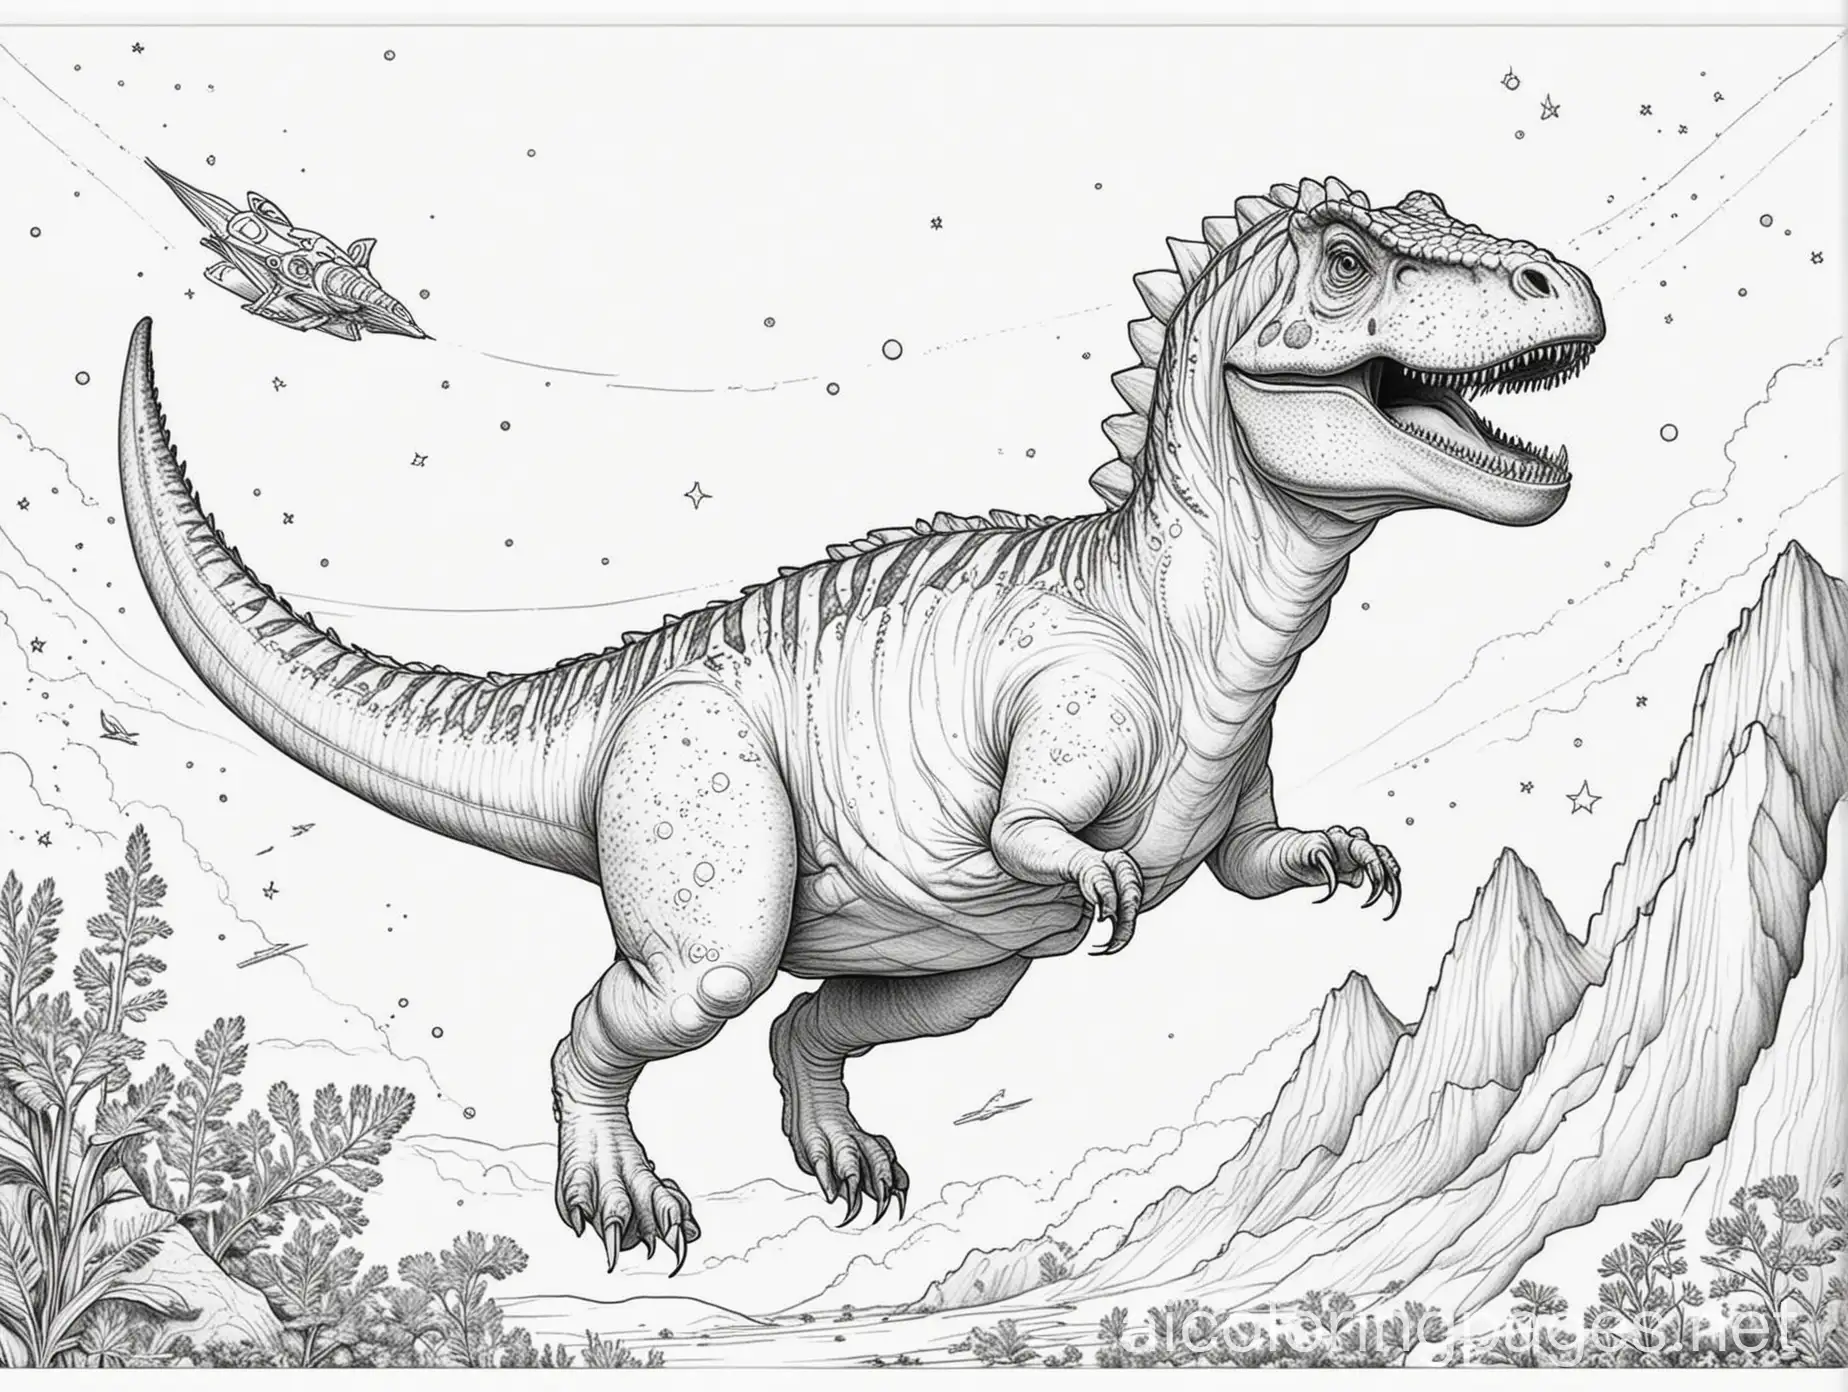 dinosaur in space, Coloring Page, black and white, line art, white background, Simplicity, Ample White Space. The background of the coloring page is plain white to make it easy for young children to color within the lines. The outlines of all the subjects are easy to distinguish, making it simple for kids to color without too much difficulty